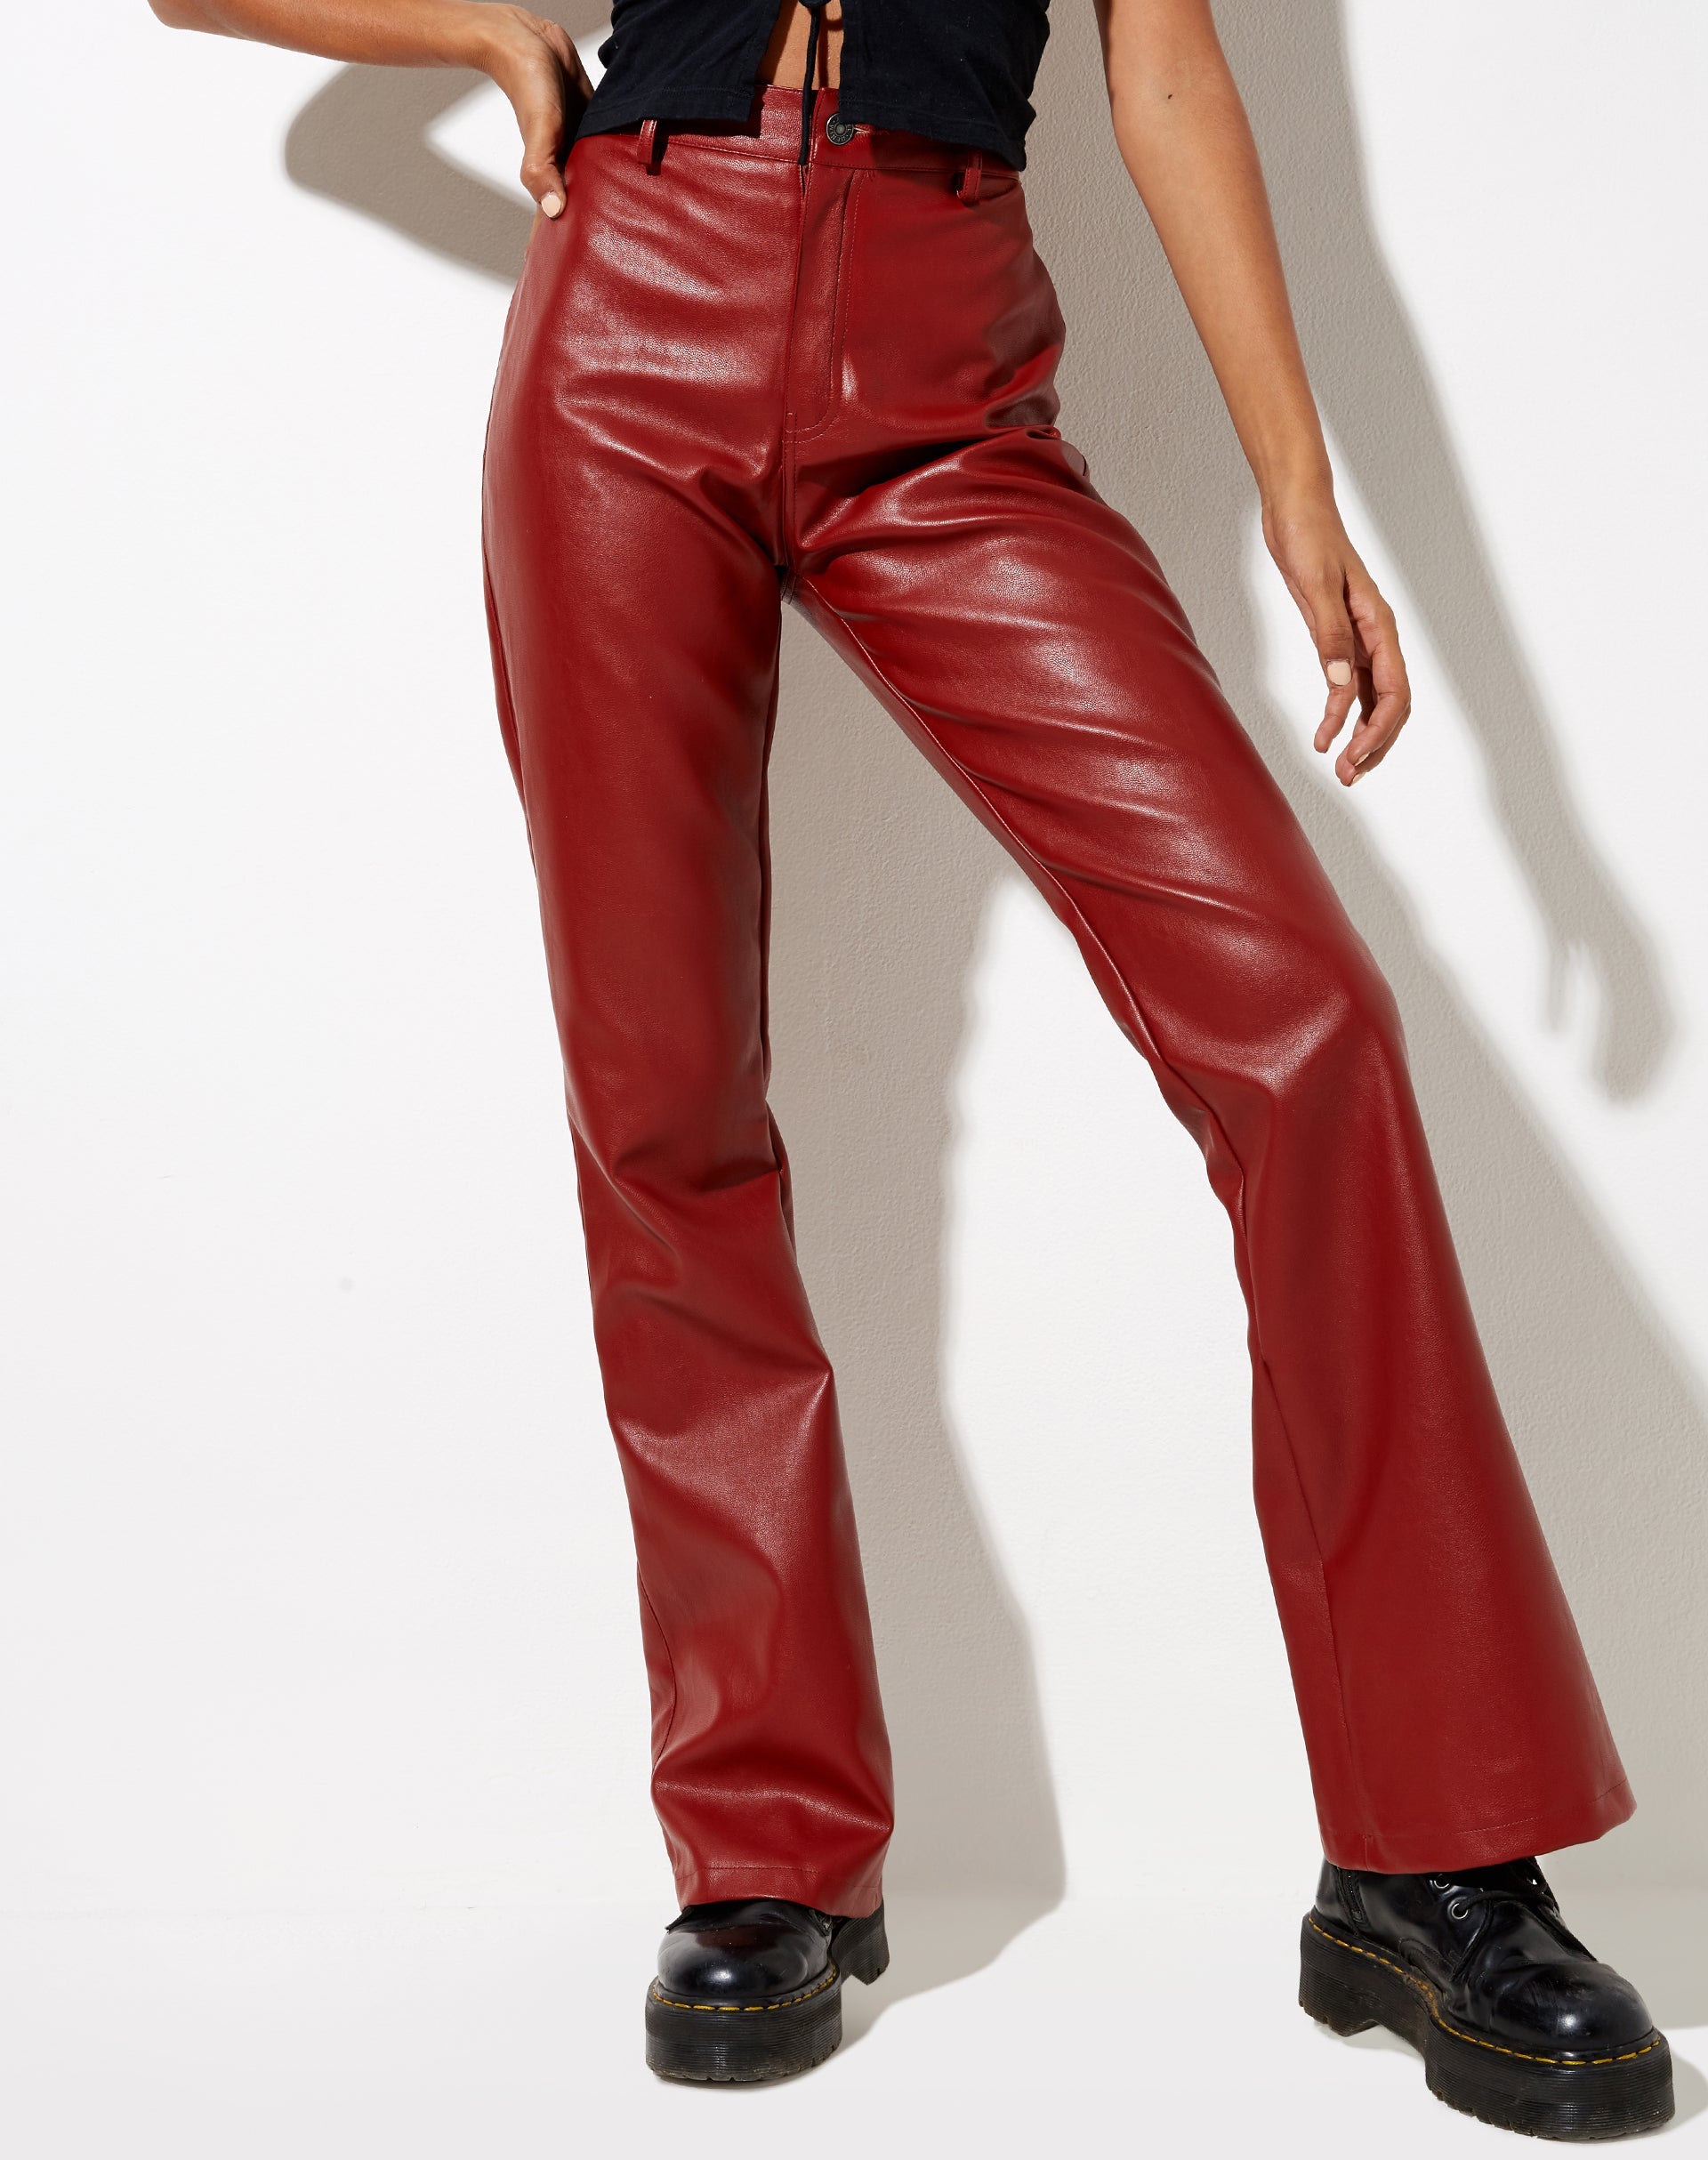 Zoven Flare Trouser in Pu Red